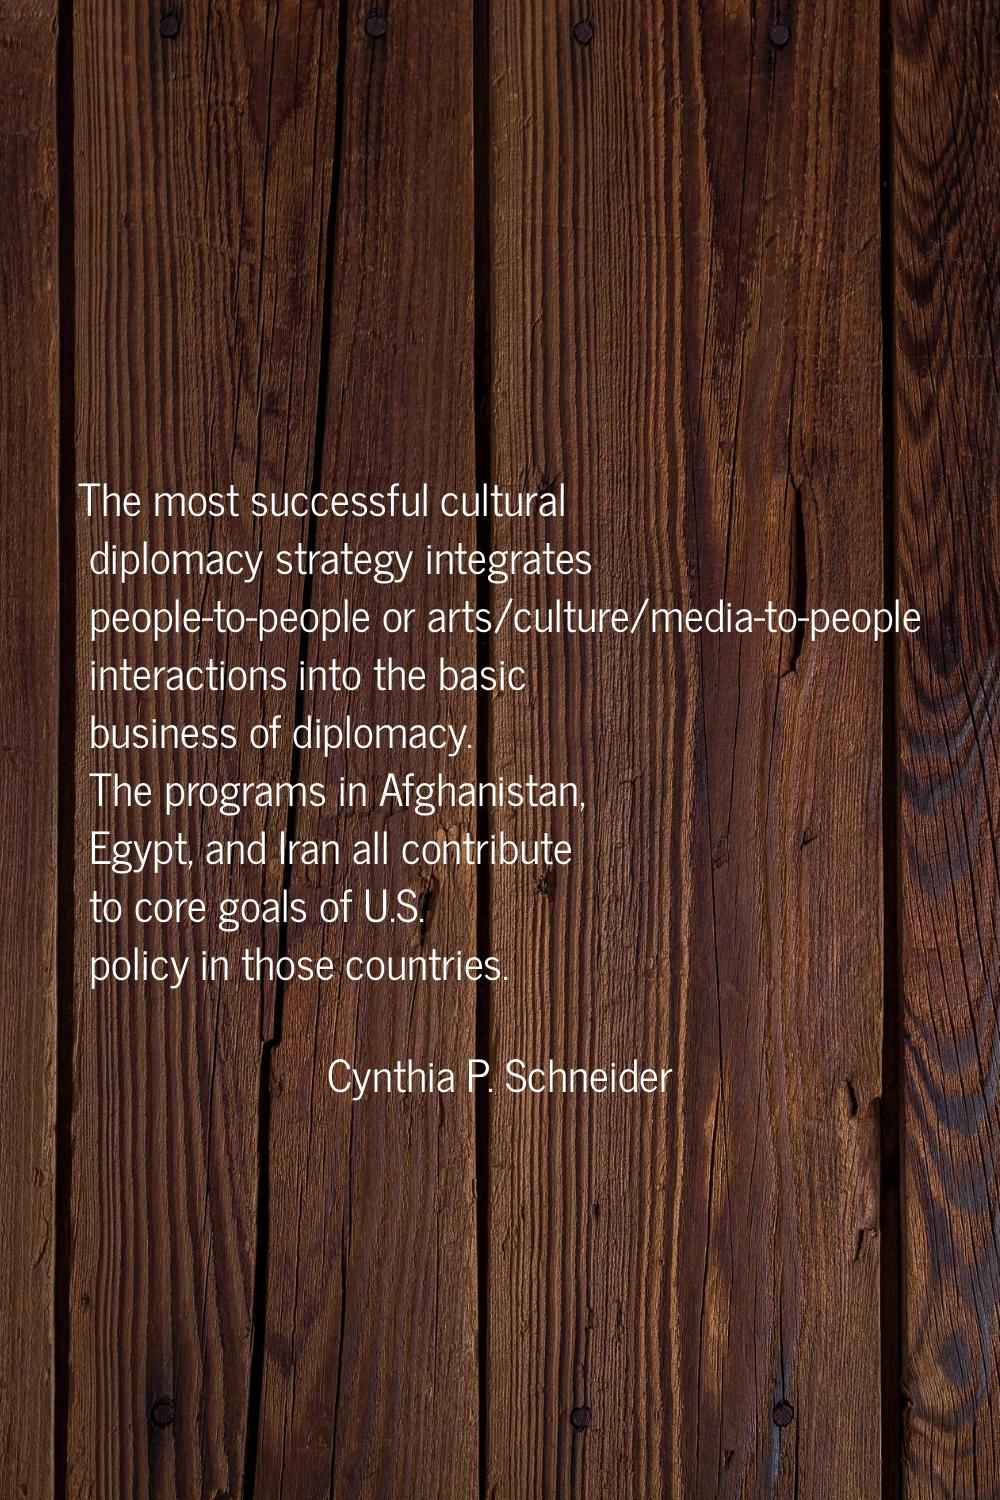 The most successful cultural diplomacy strategy integrates people-to-people or arts/culture/media-t